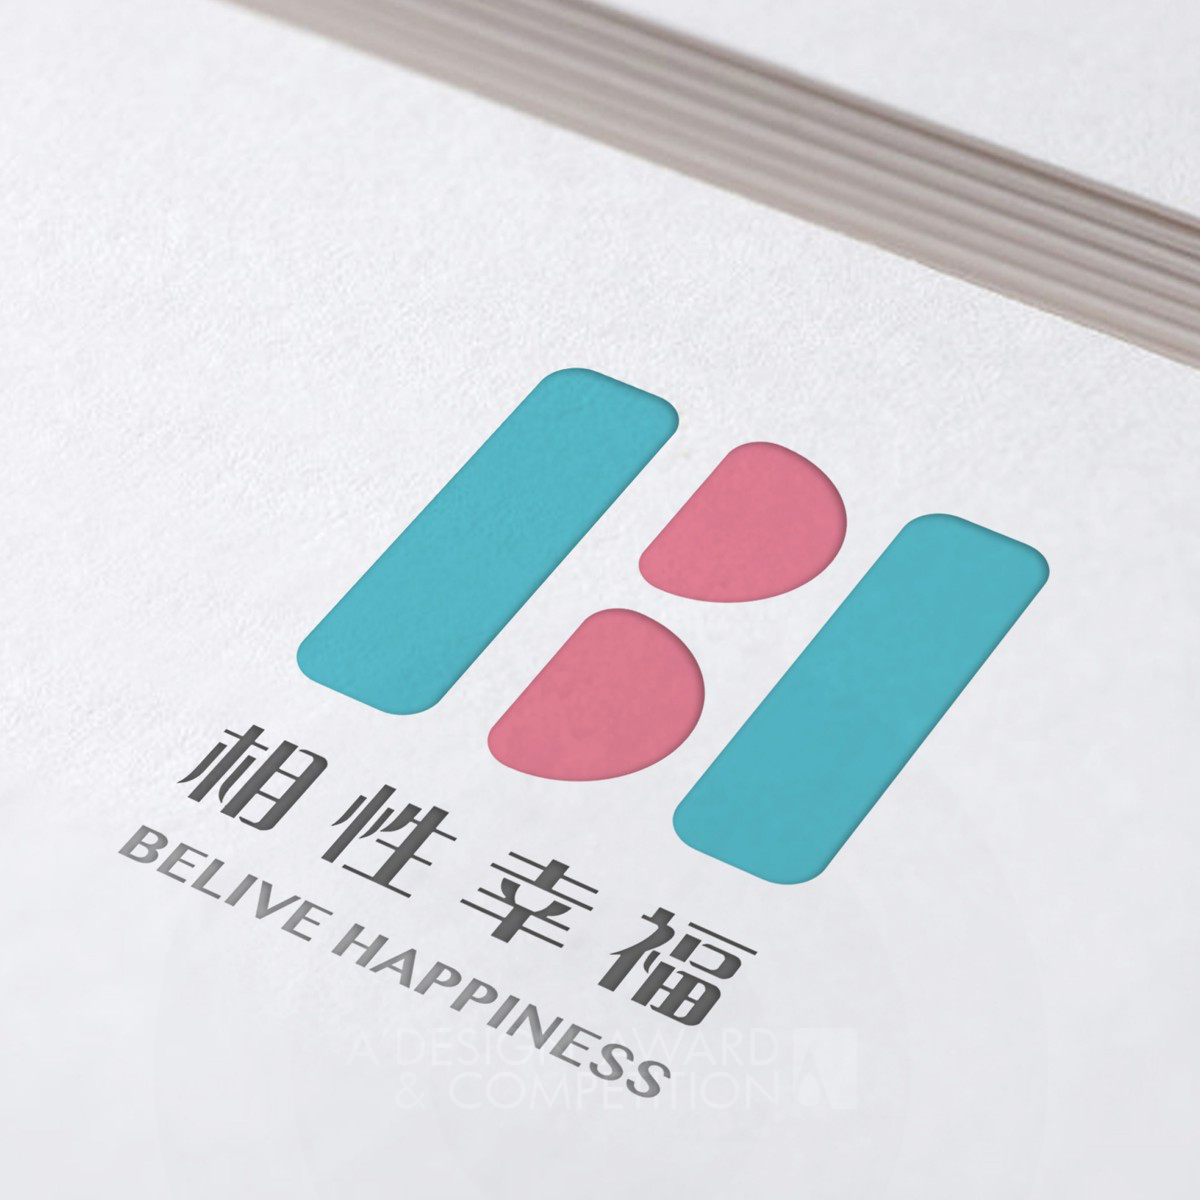 Belive Happinesss Visual Identity by Existence Design Co., Ltd